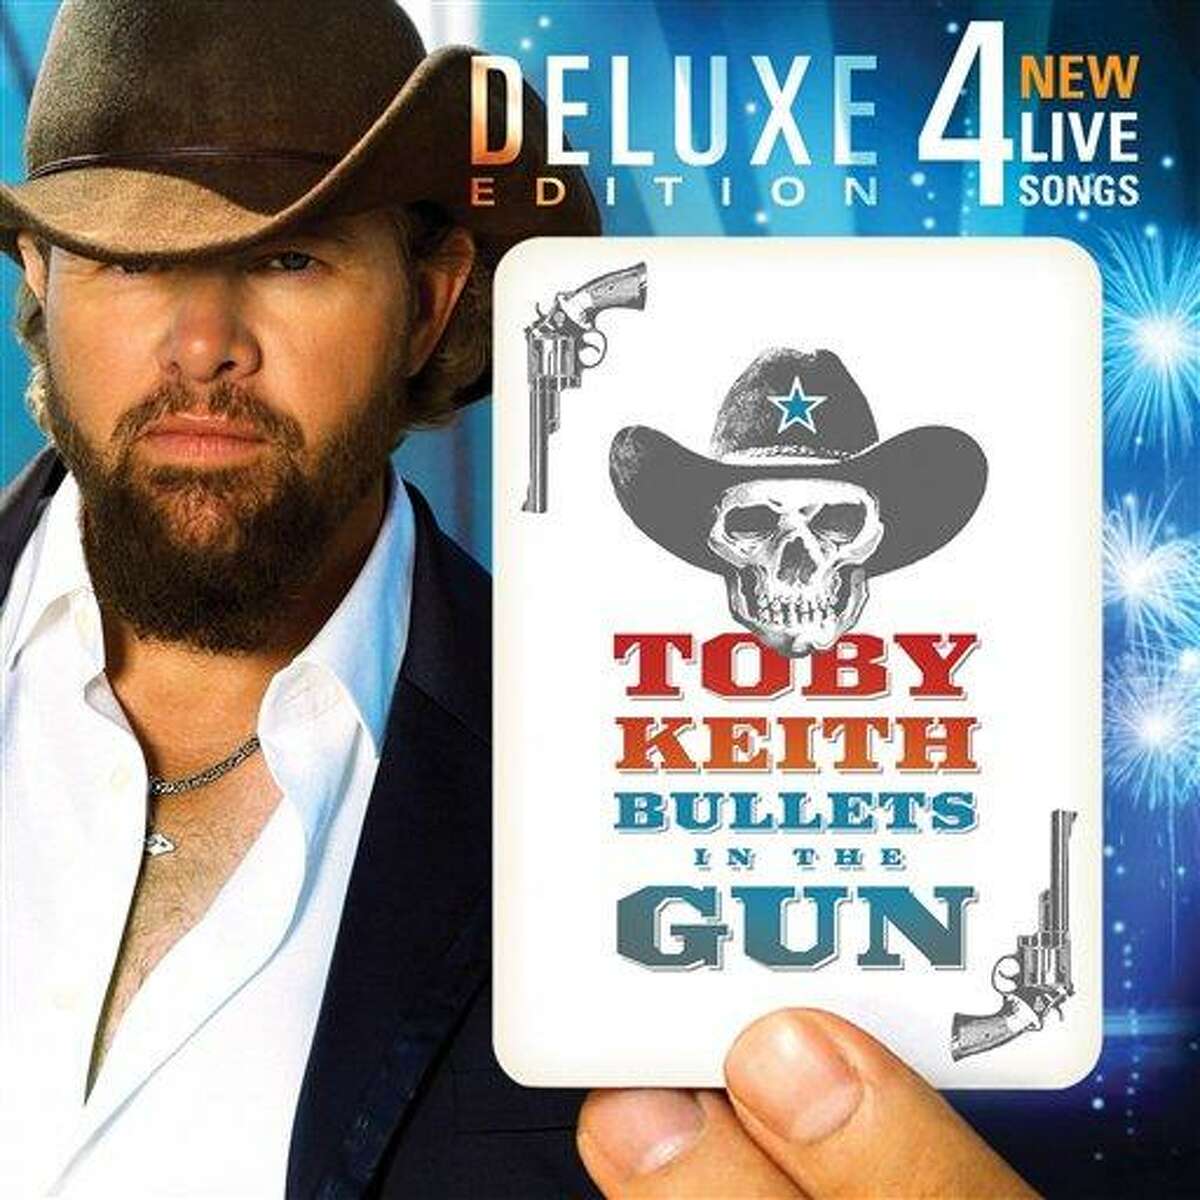 In this CD cover image released by Show Dog-Universal, the latest by Toby Keith, "Bullets In The Gun" is shown. (AP Photo/Show Dog-Universal)